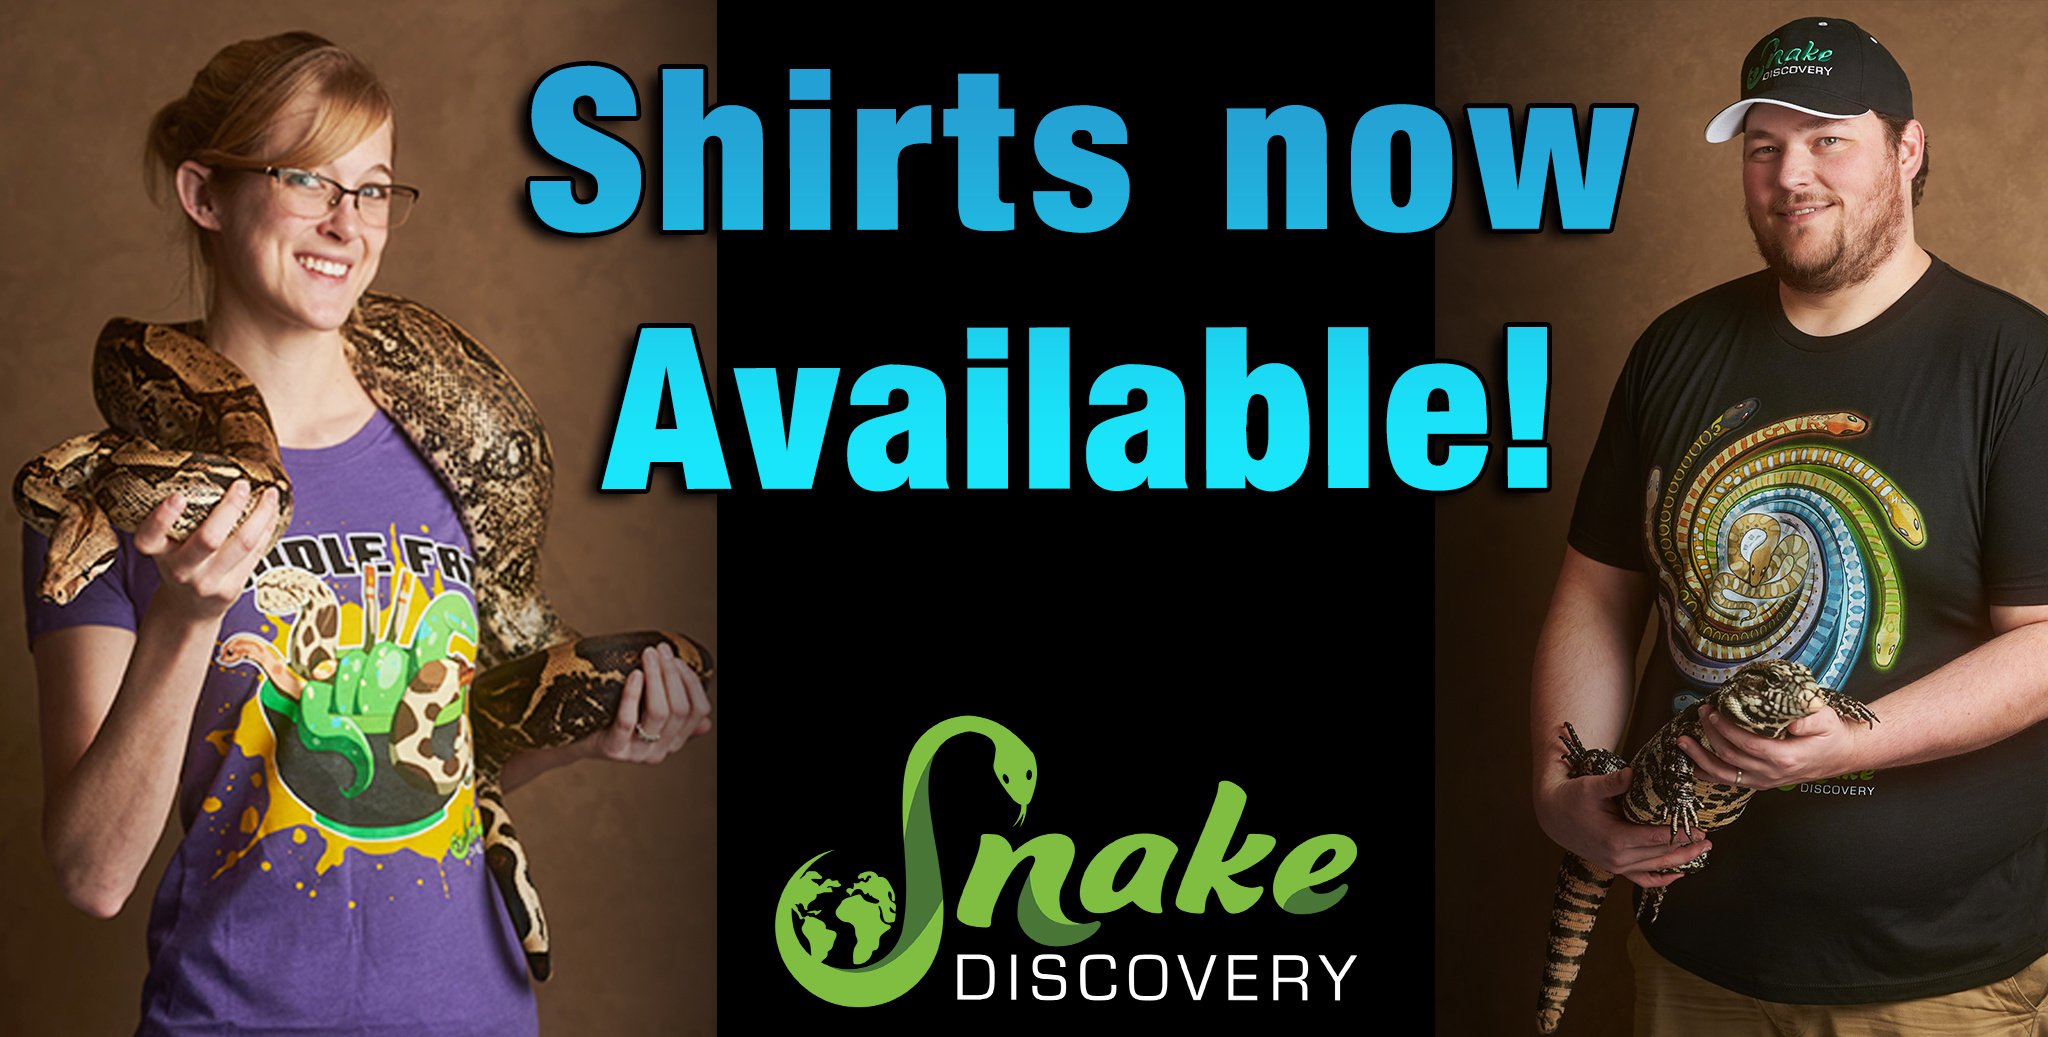 Welcome to the Snake Discovery Online Store